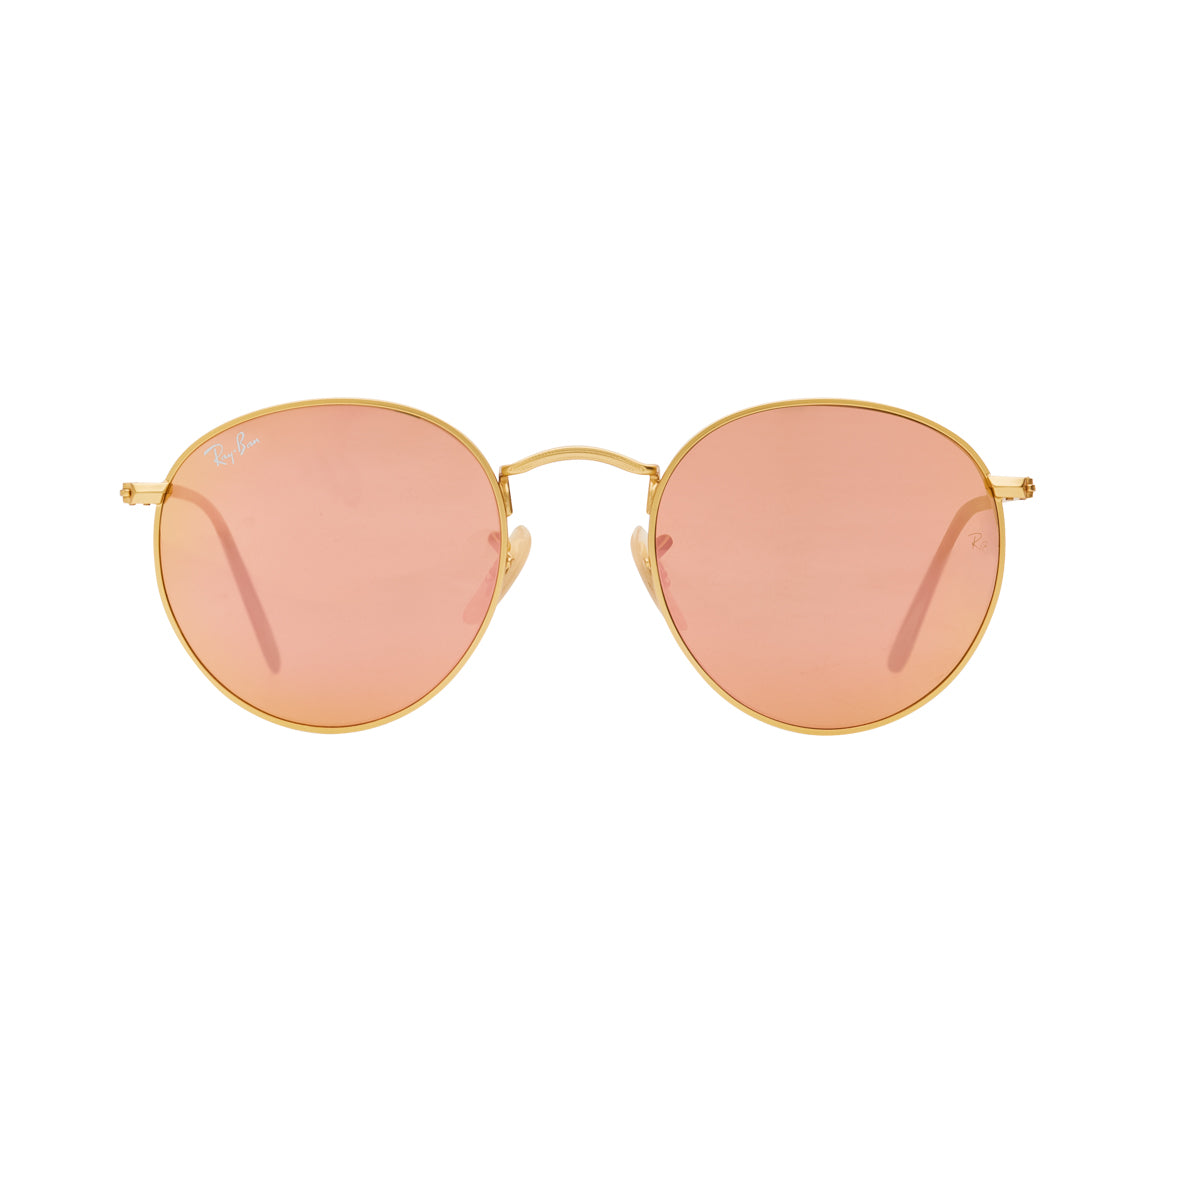 Ray-Ban Round Flash RB3447 Sunglasses - Pink/Gold Front